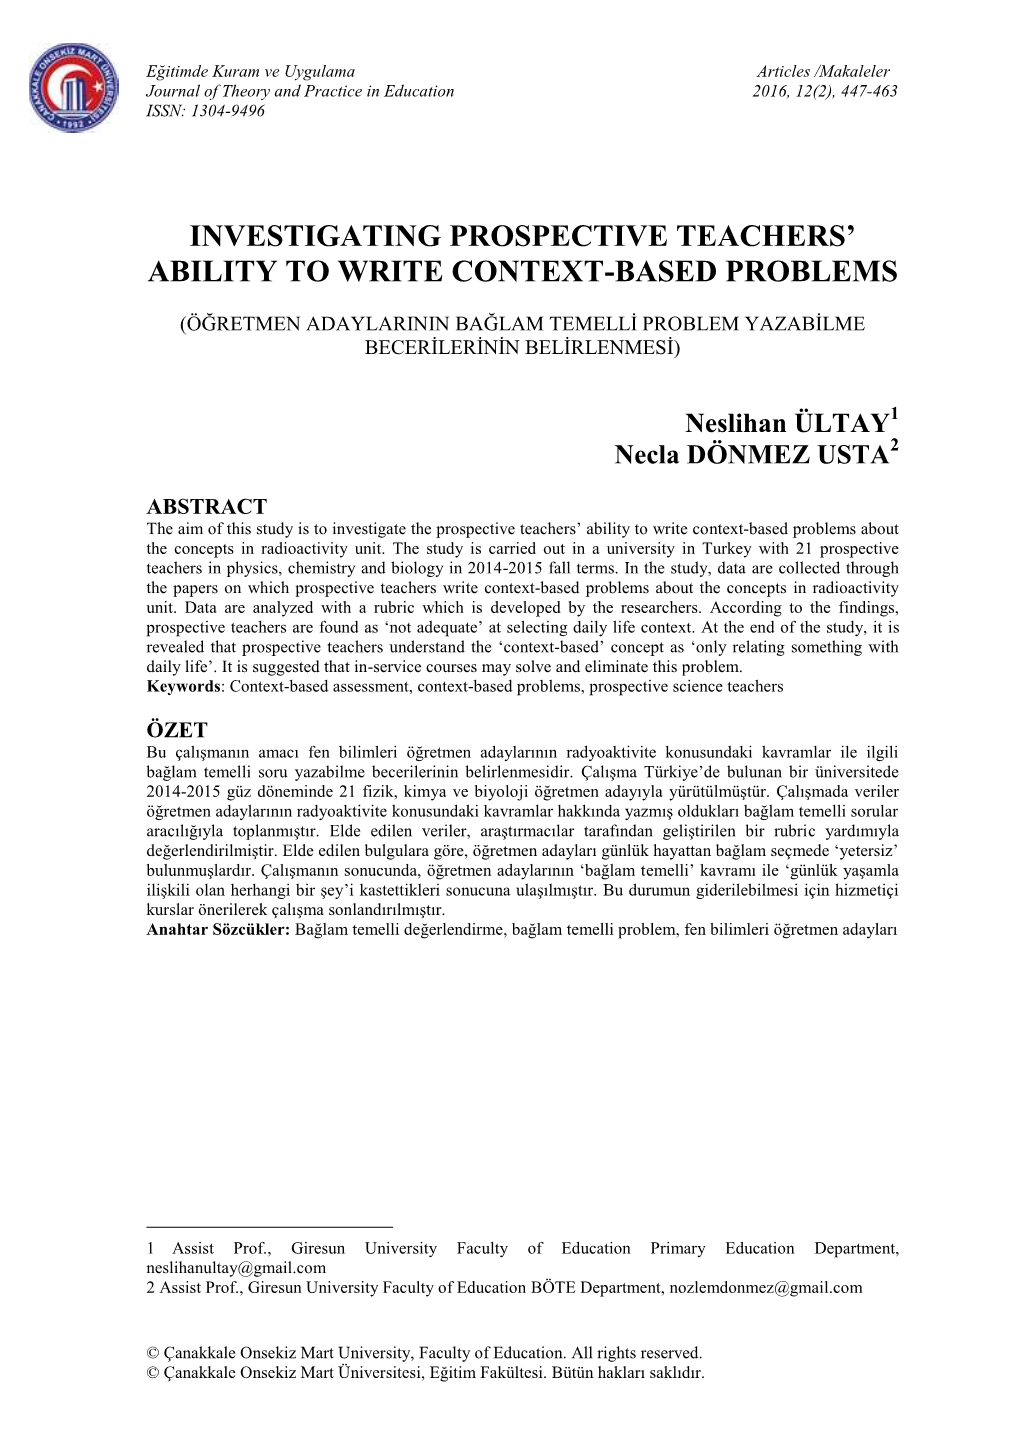 Investigating Prospective Teachers' Ability to Write Context